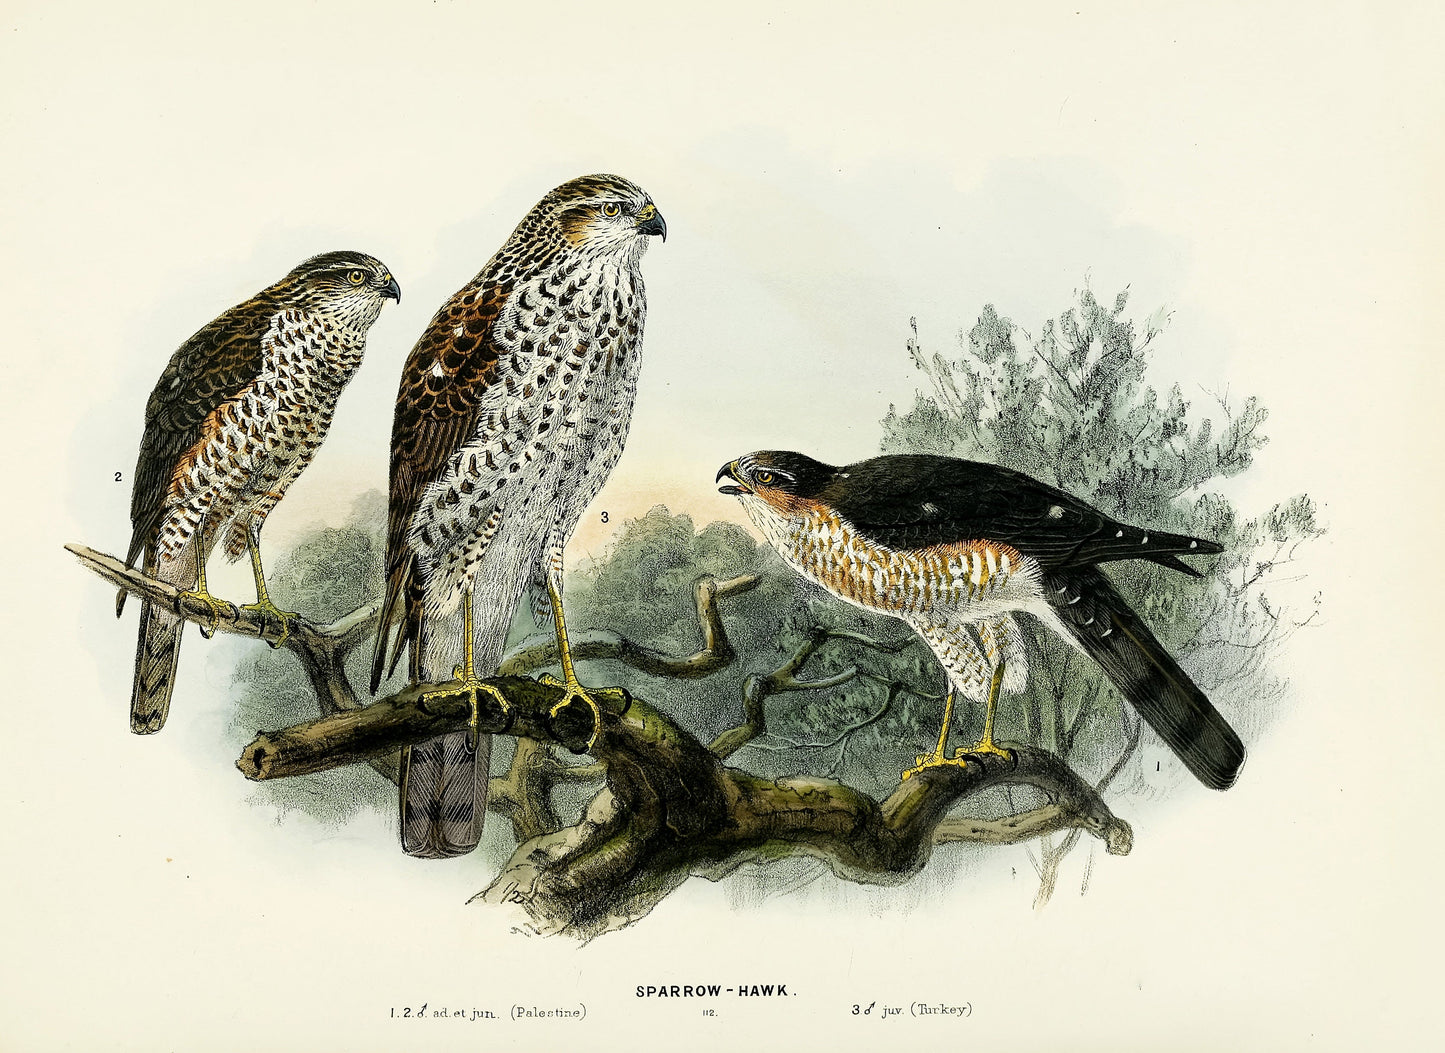 A History of the Birds of Europe Set 7 [45 Images]